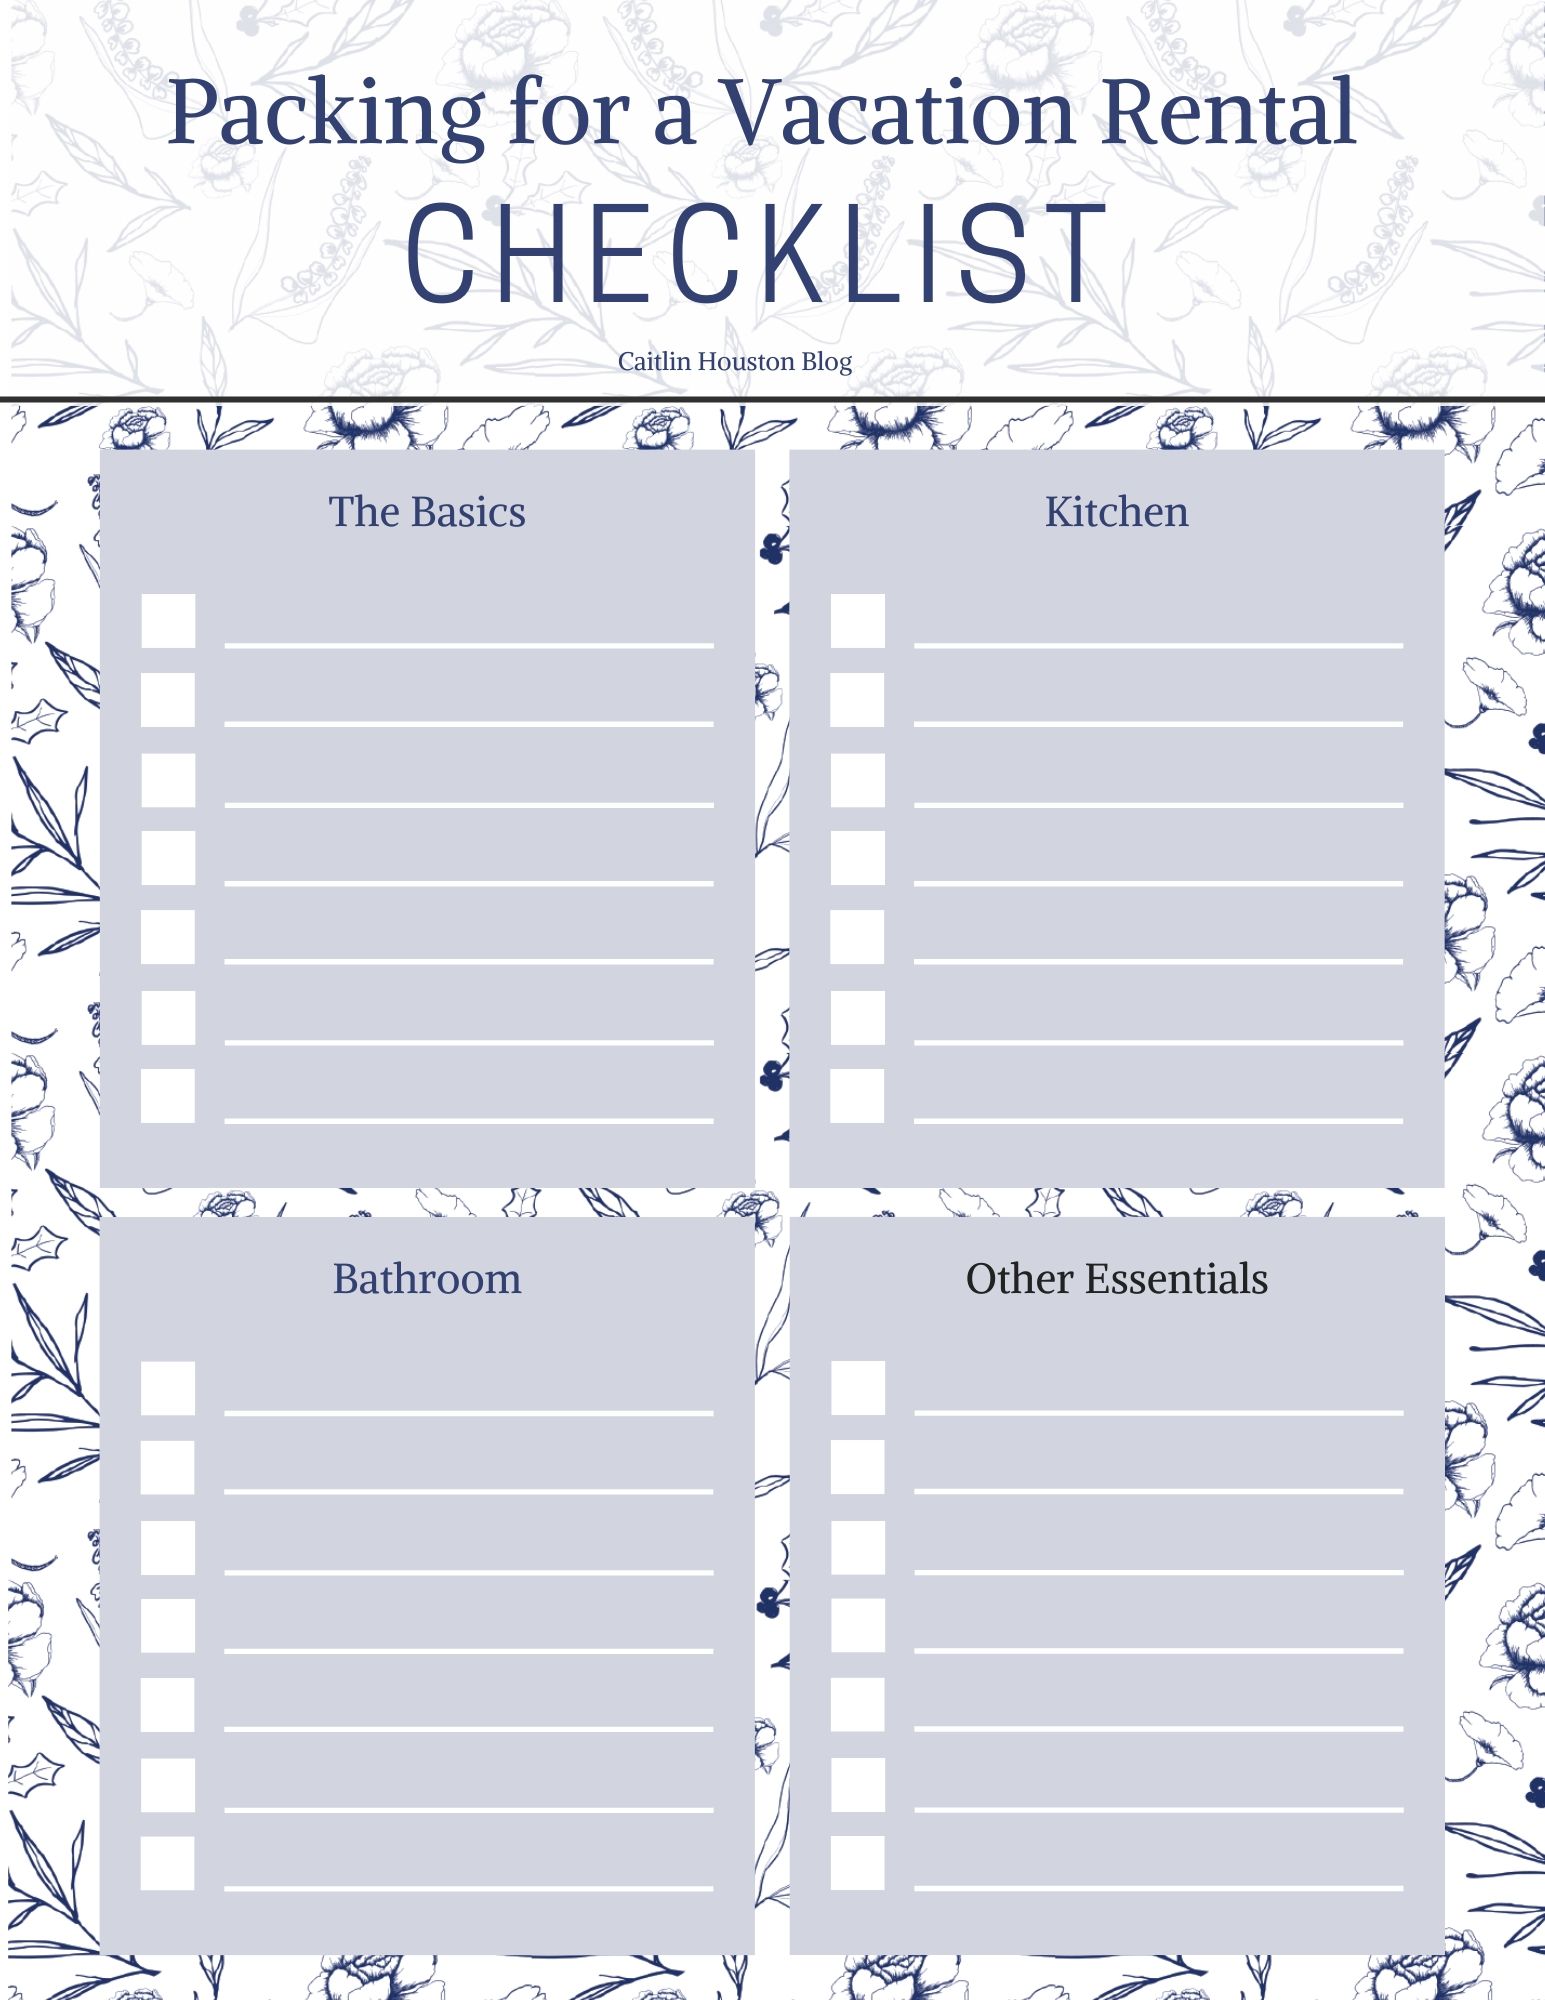 Packing for a Vacation Rental Checklist